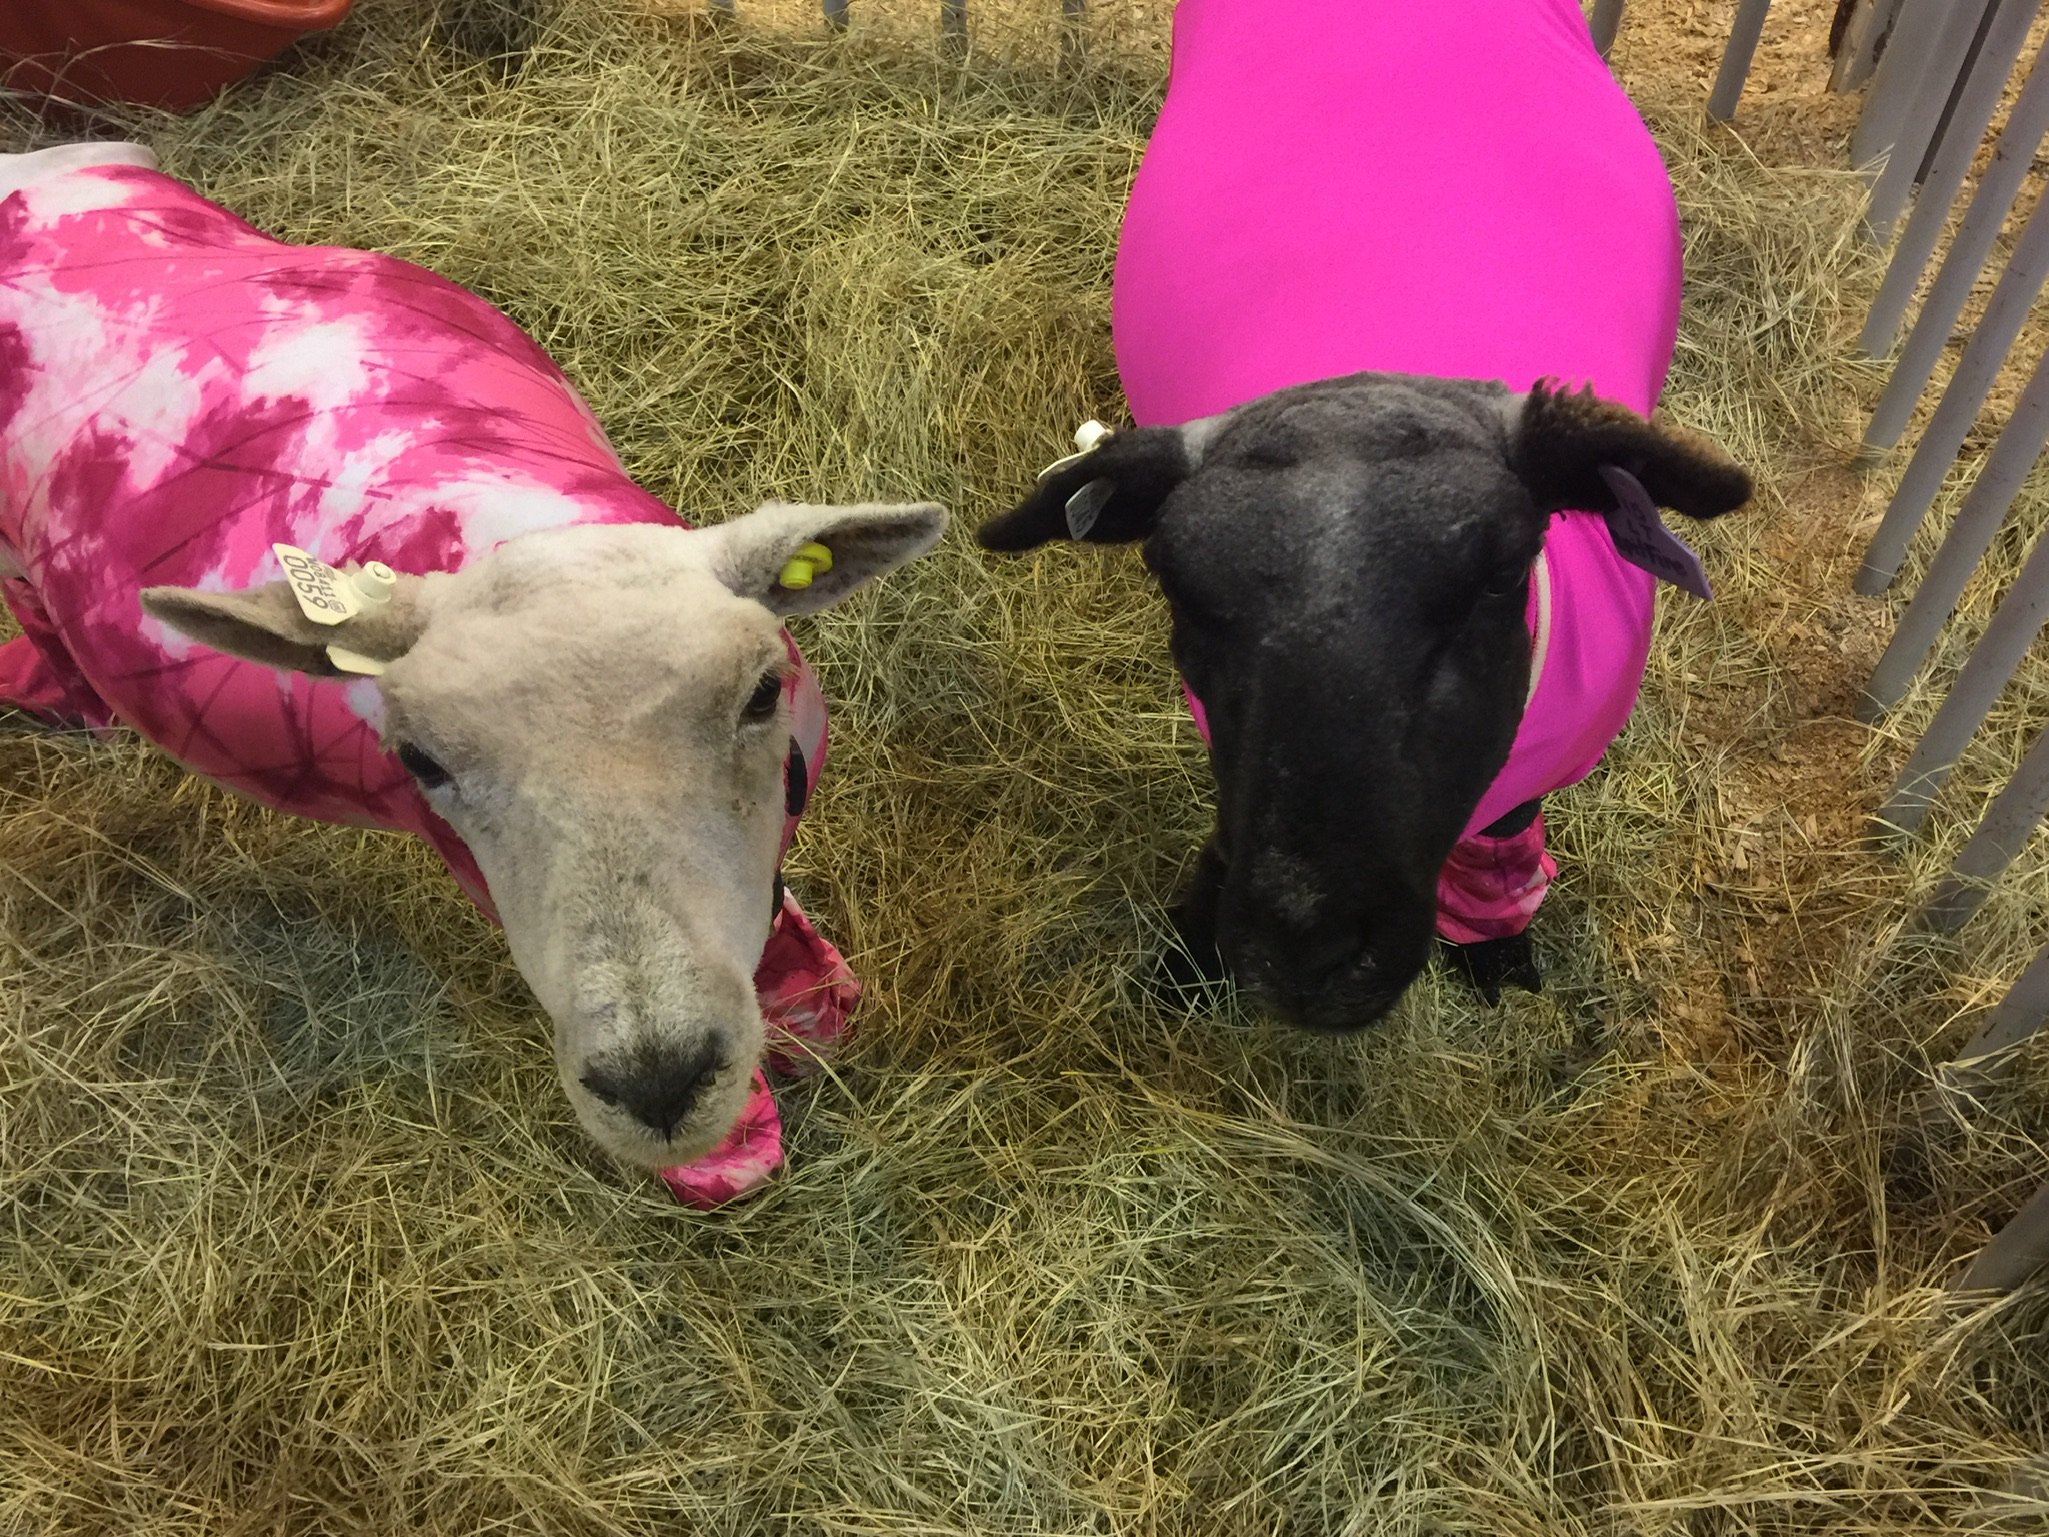 Sheep attending the Houston Livestock Show and Rodeo.